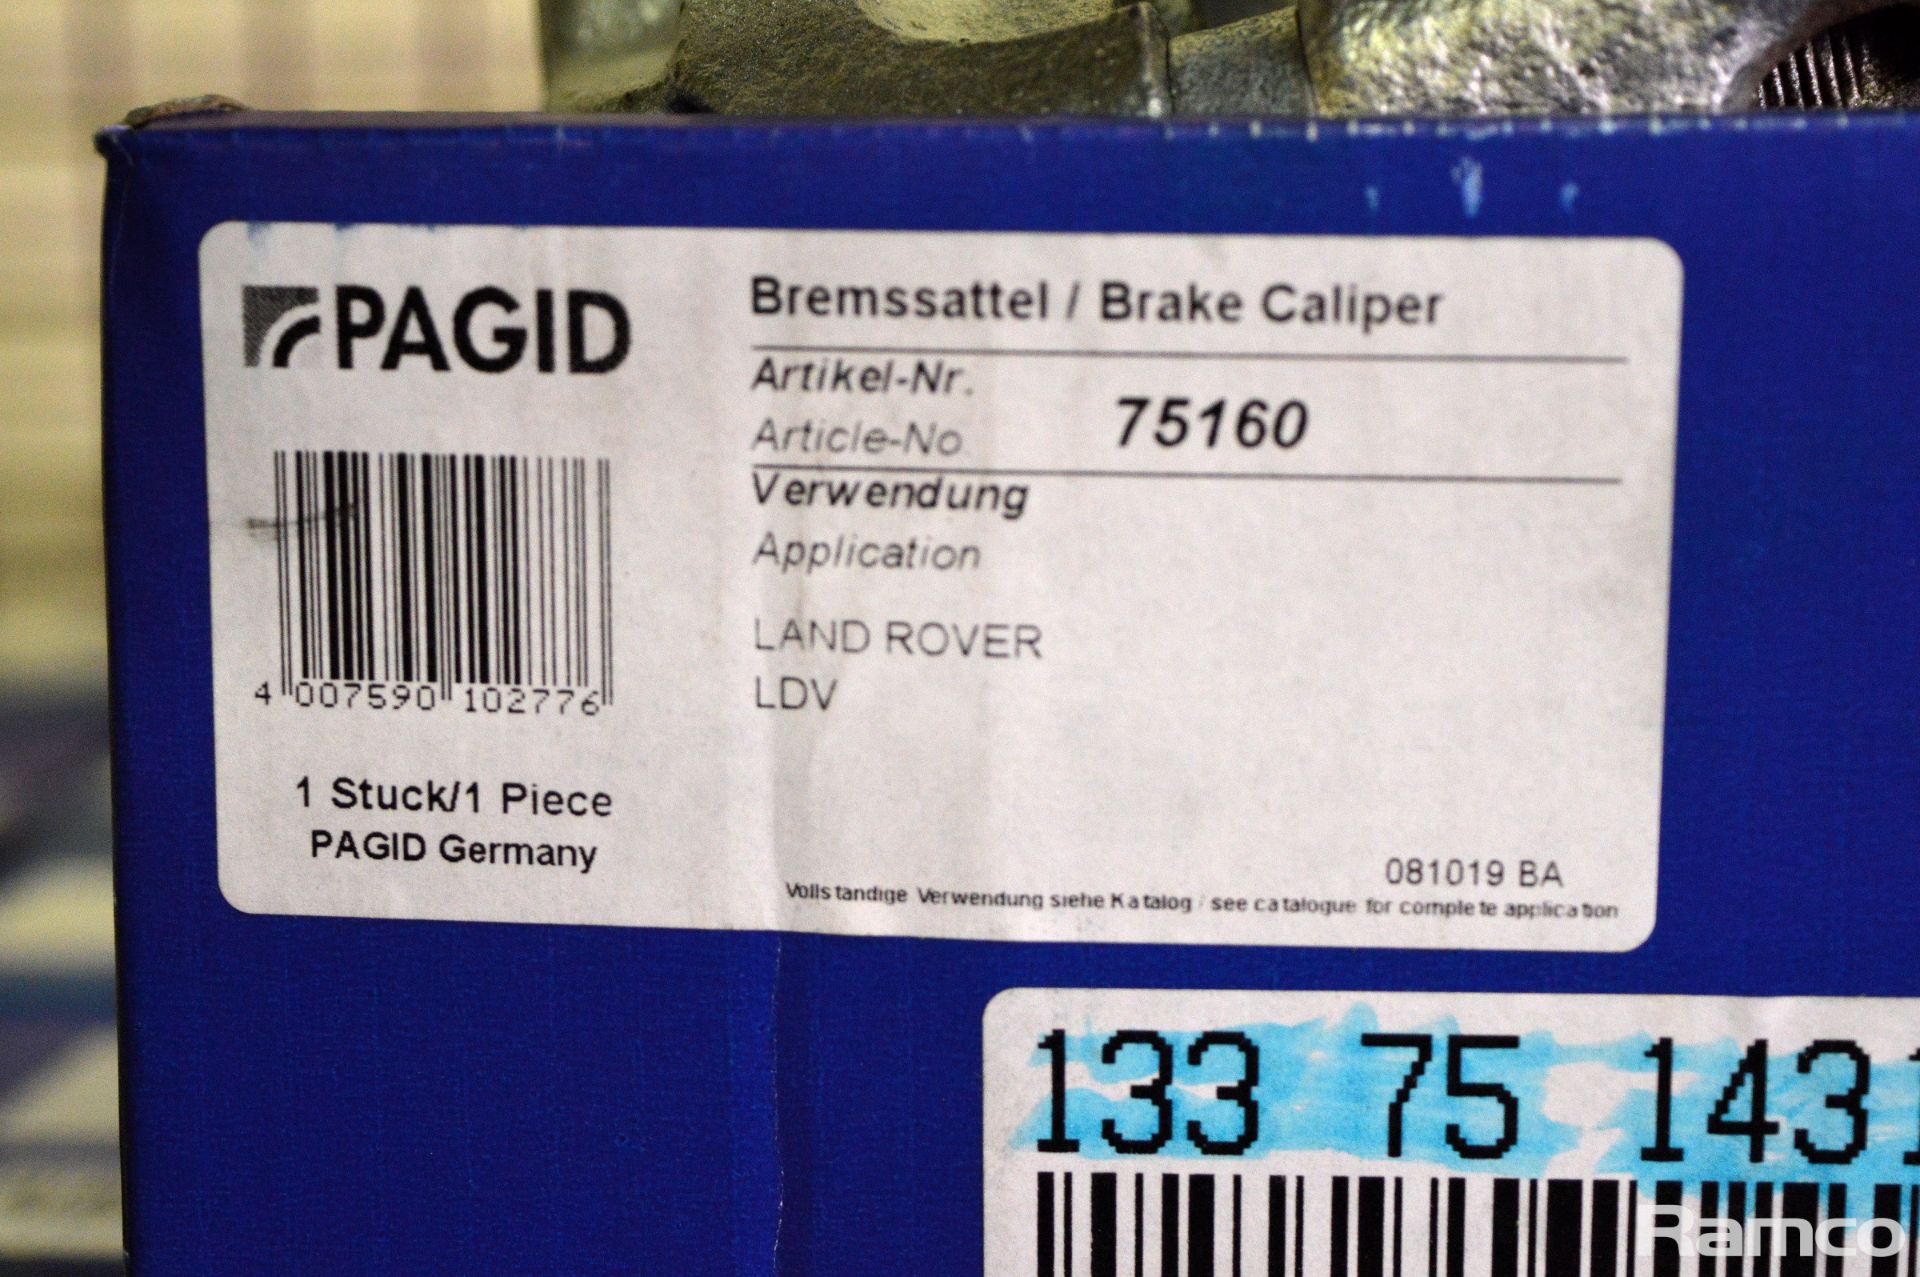 Pagid brake calipers - see pictures for model / type - Image 7 of 7